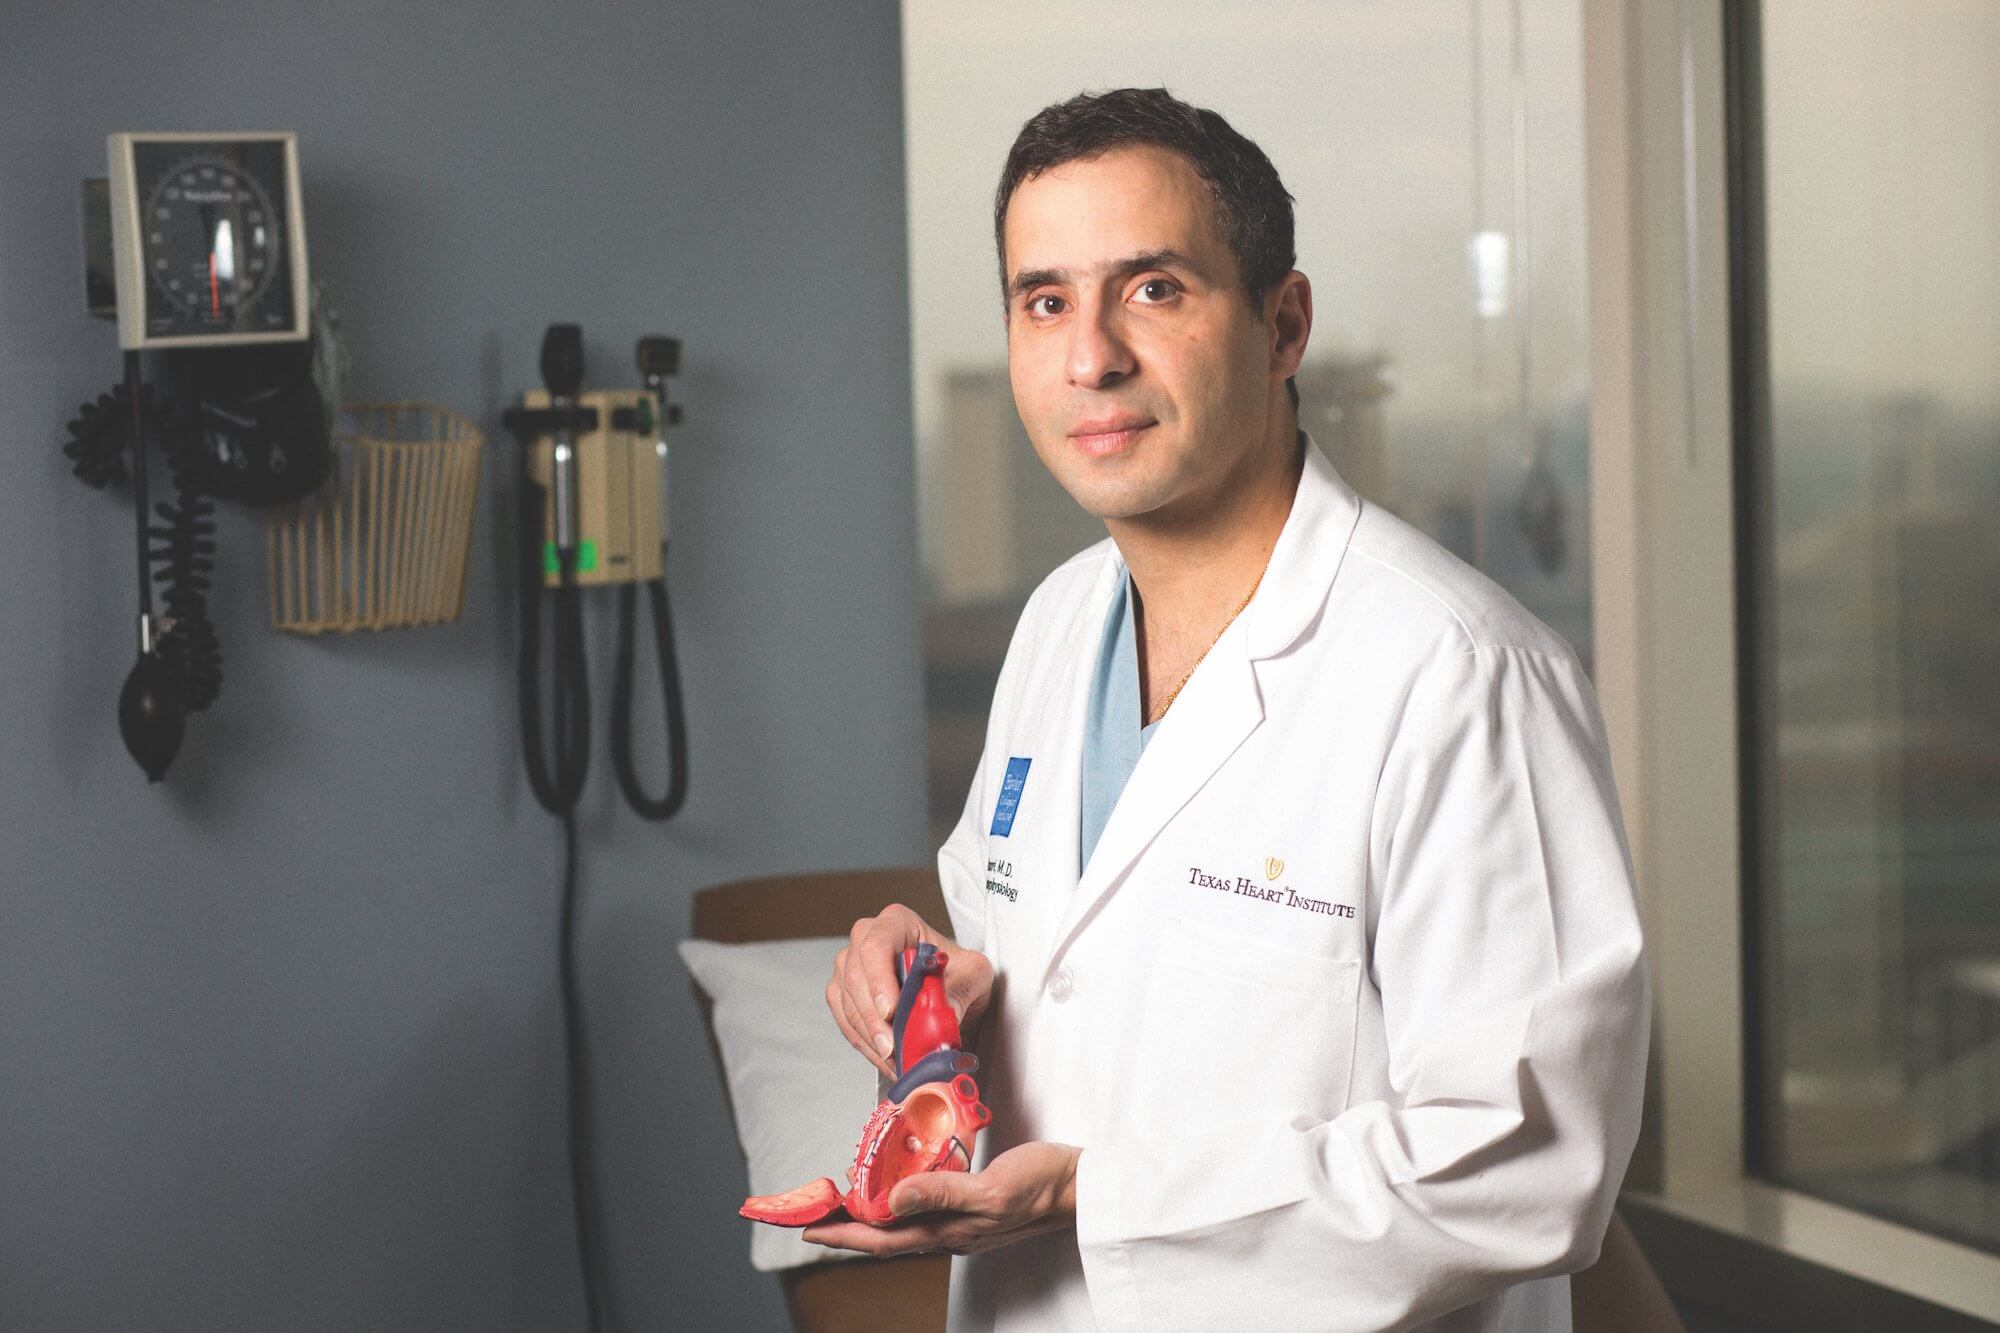 Mehdi Razavi, M.D., director of clinical arrhythmia research and innovation at Texas Heart Institute, holds a heart model.